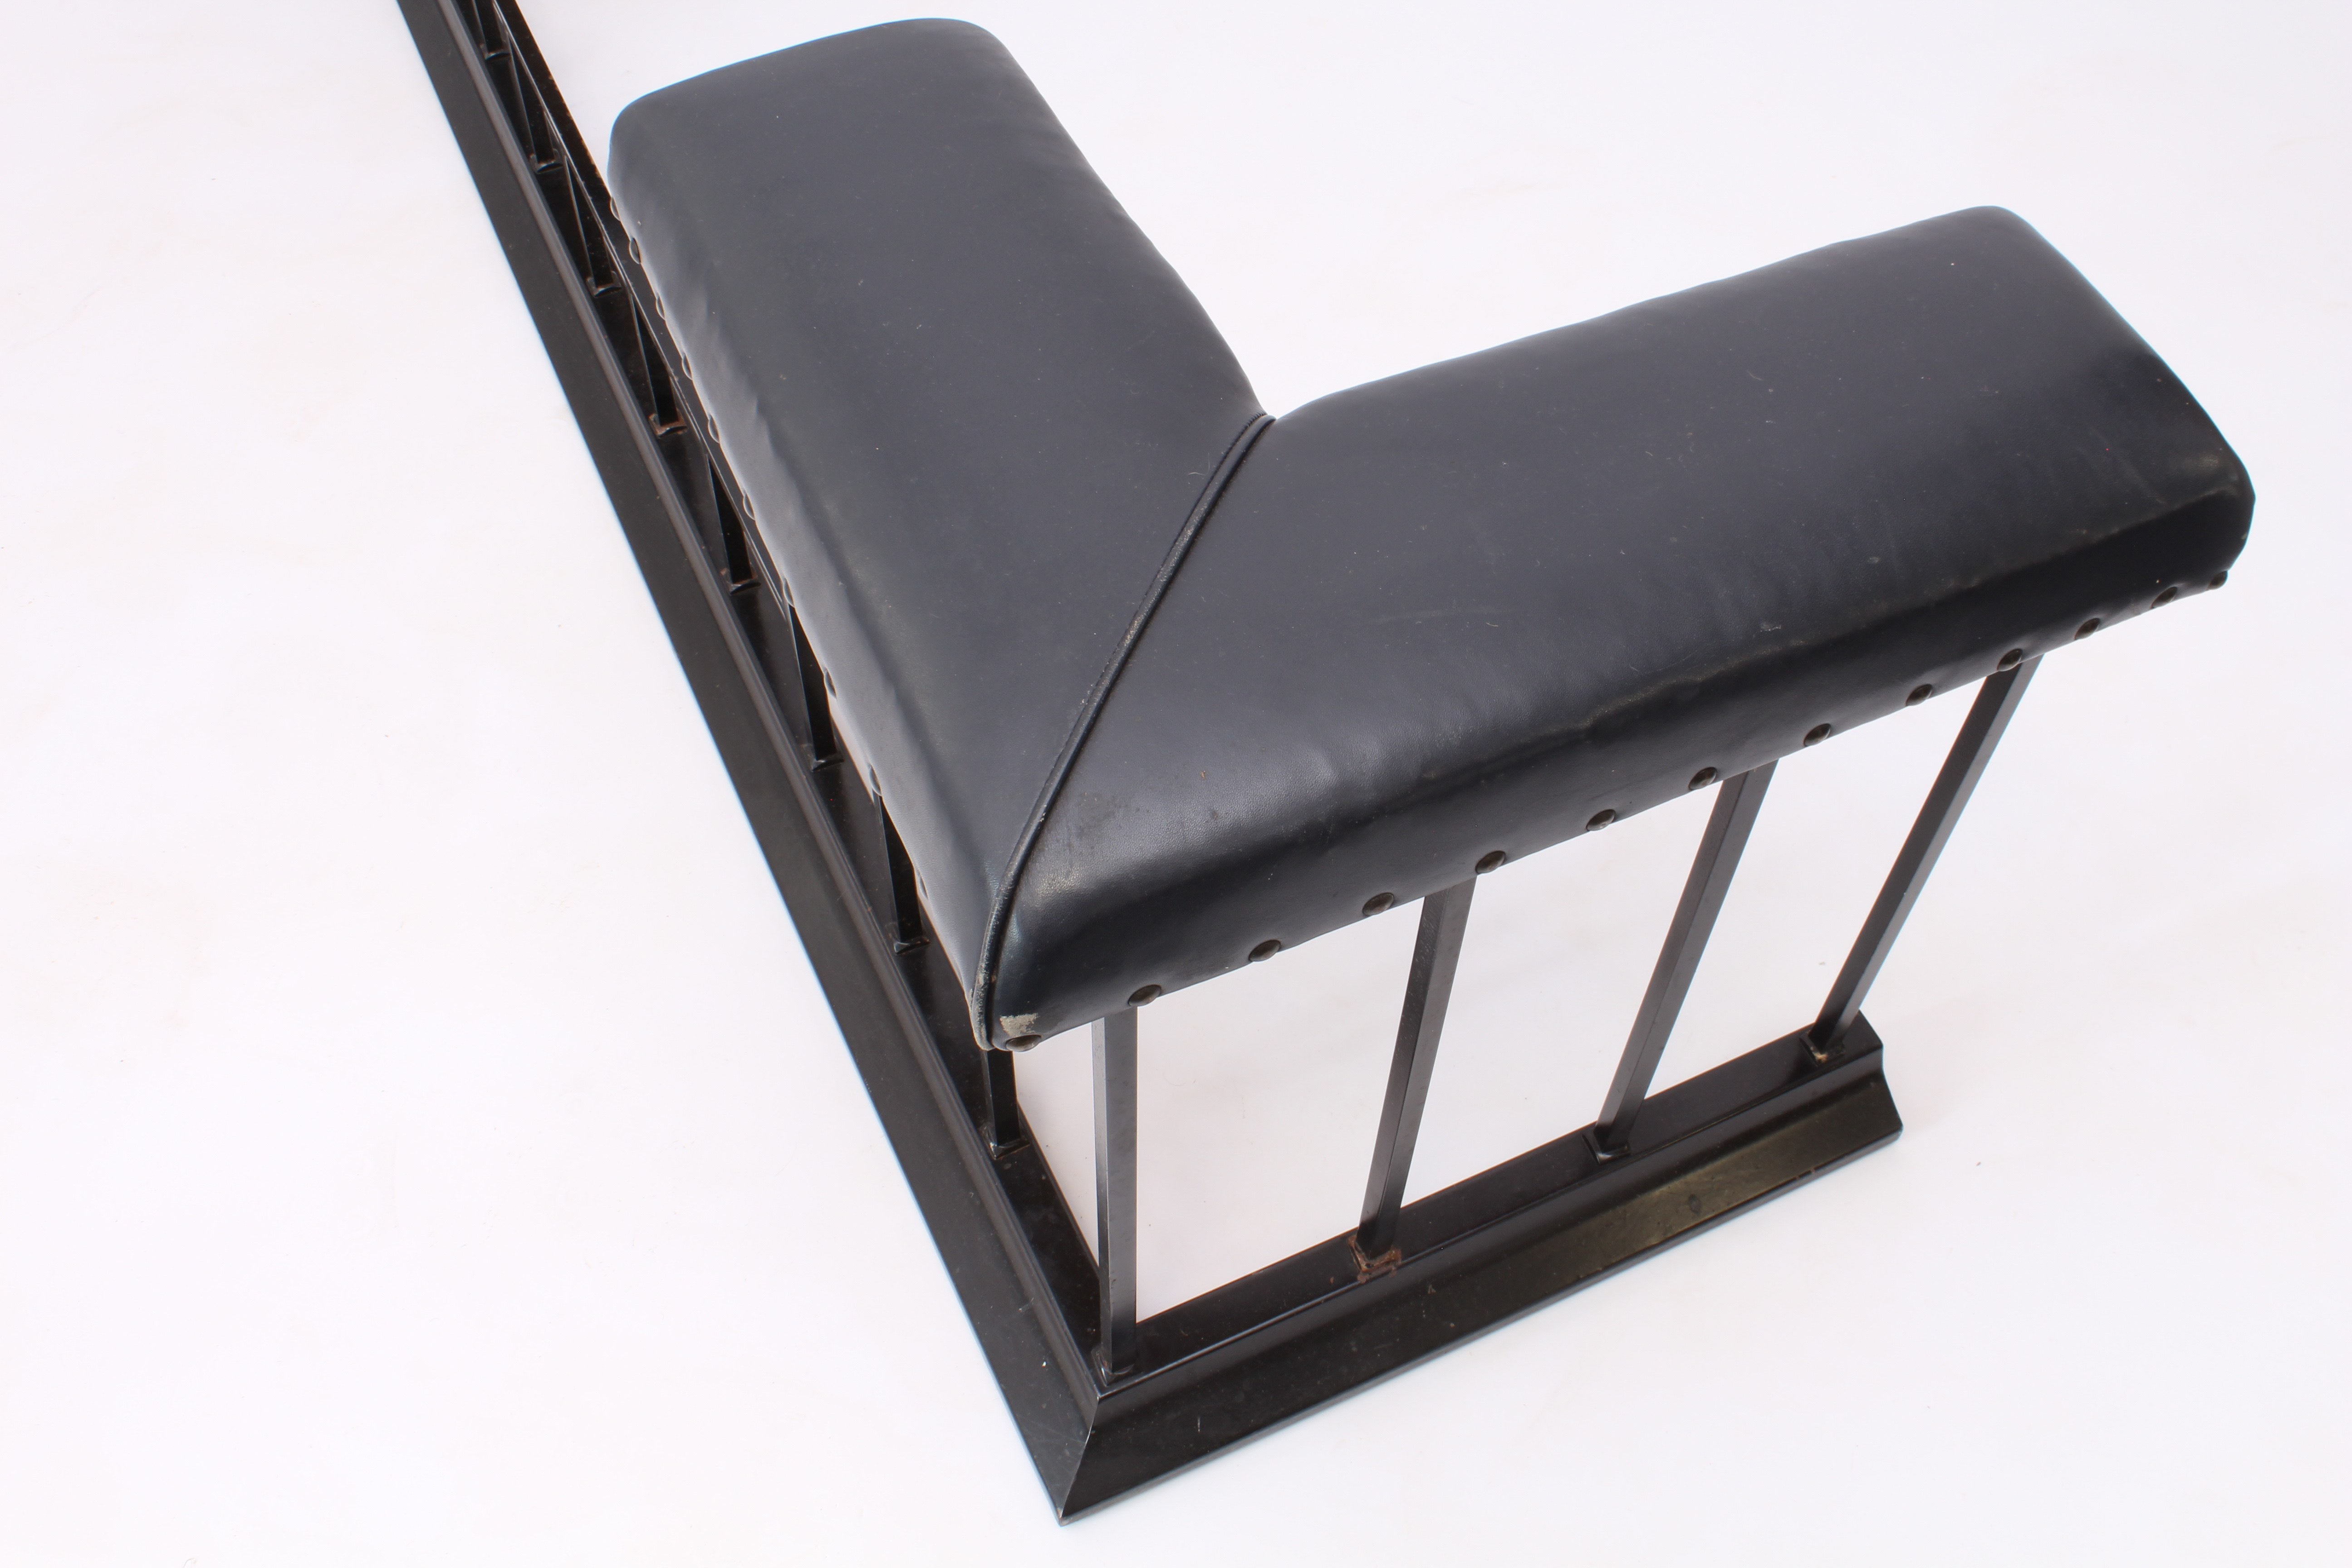 A painted steel and black leather club fender - 161.5 cm long, 49.5 cm deep, 52 cm high. - Image 3 of 4